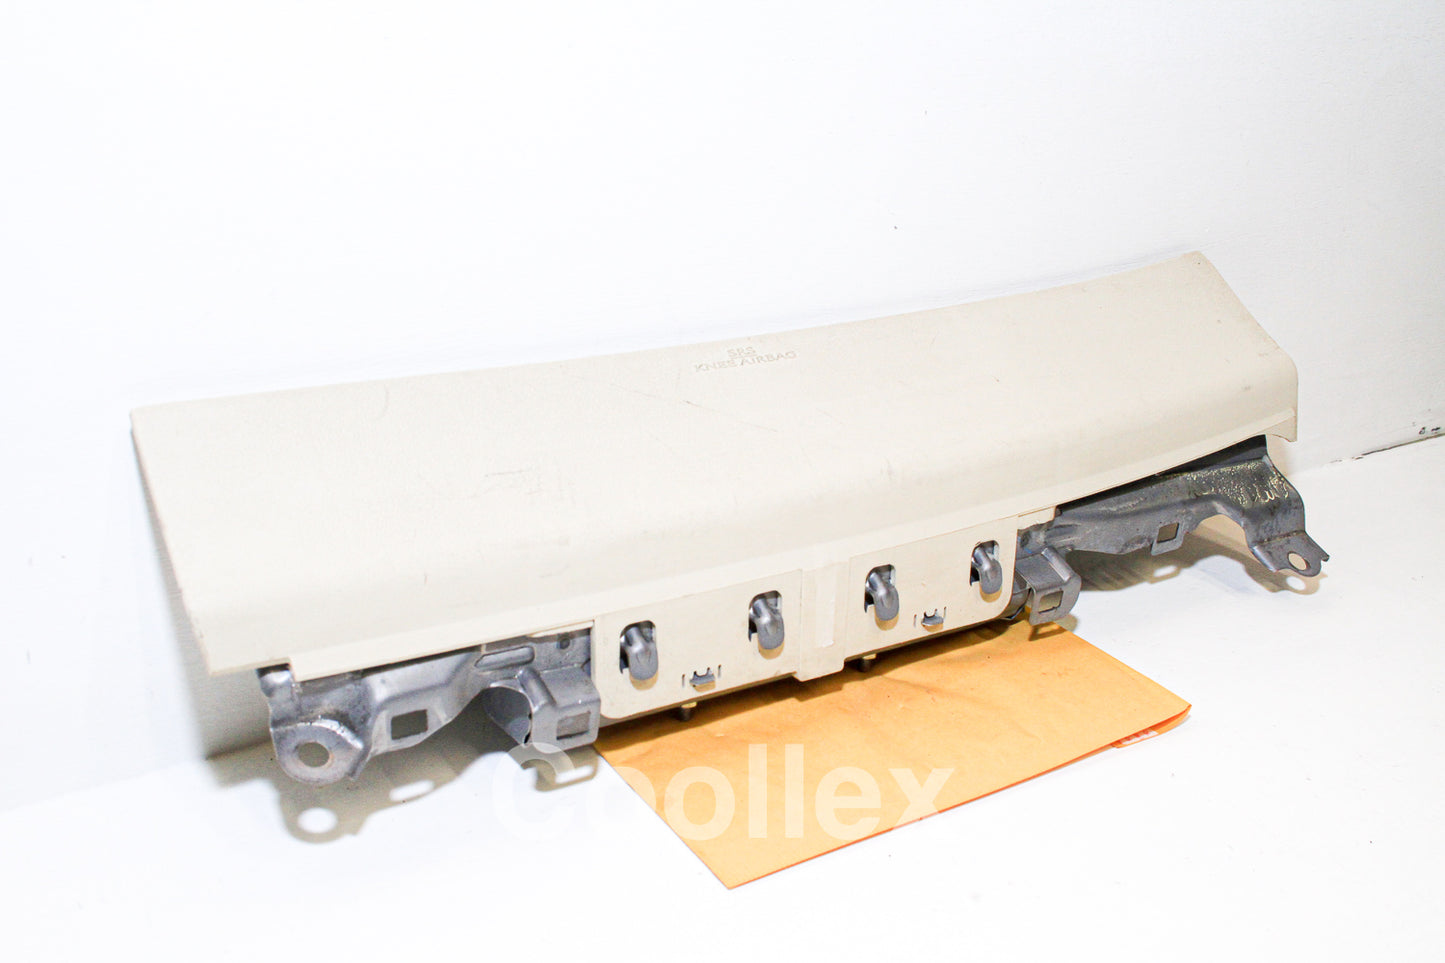 09-13 Lexus Is350 Front Right Pass Side Dashboard Knee Airbag Beige 73990-53020-A1  OEM